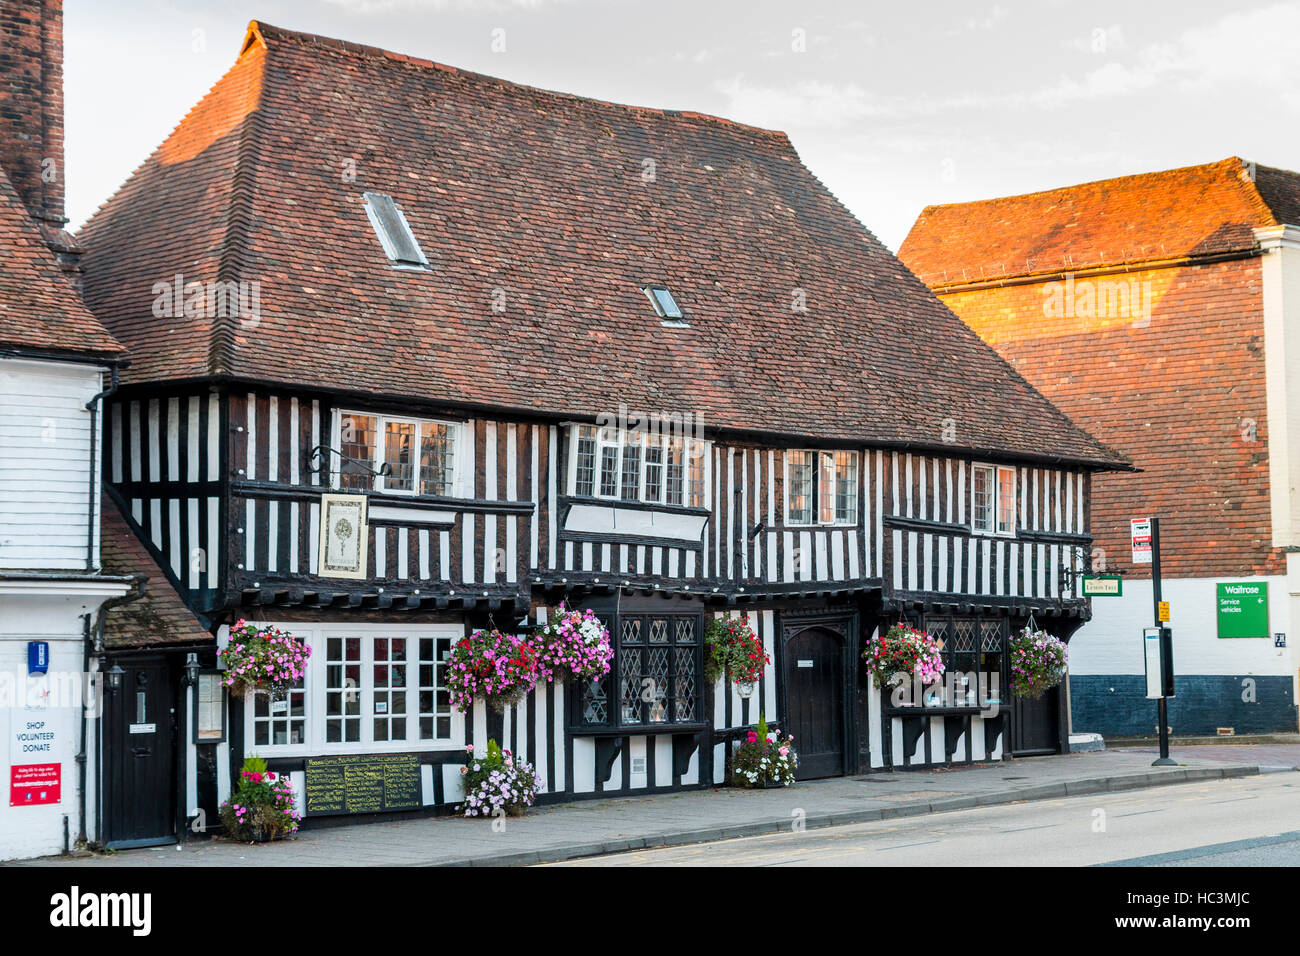 England, Tenterden. 16th century white plaster and black timber building. Wealden Hall House. Was the towns Great Hall, now 'Lemon Tree' restaurant. Stock Photo